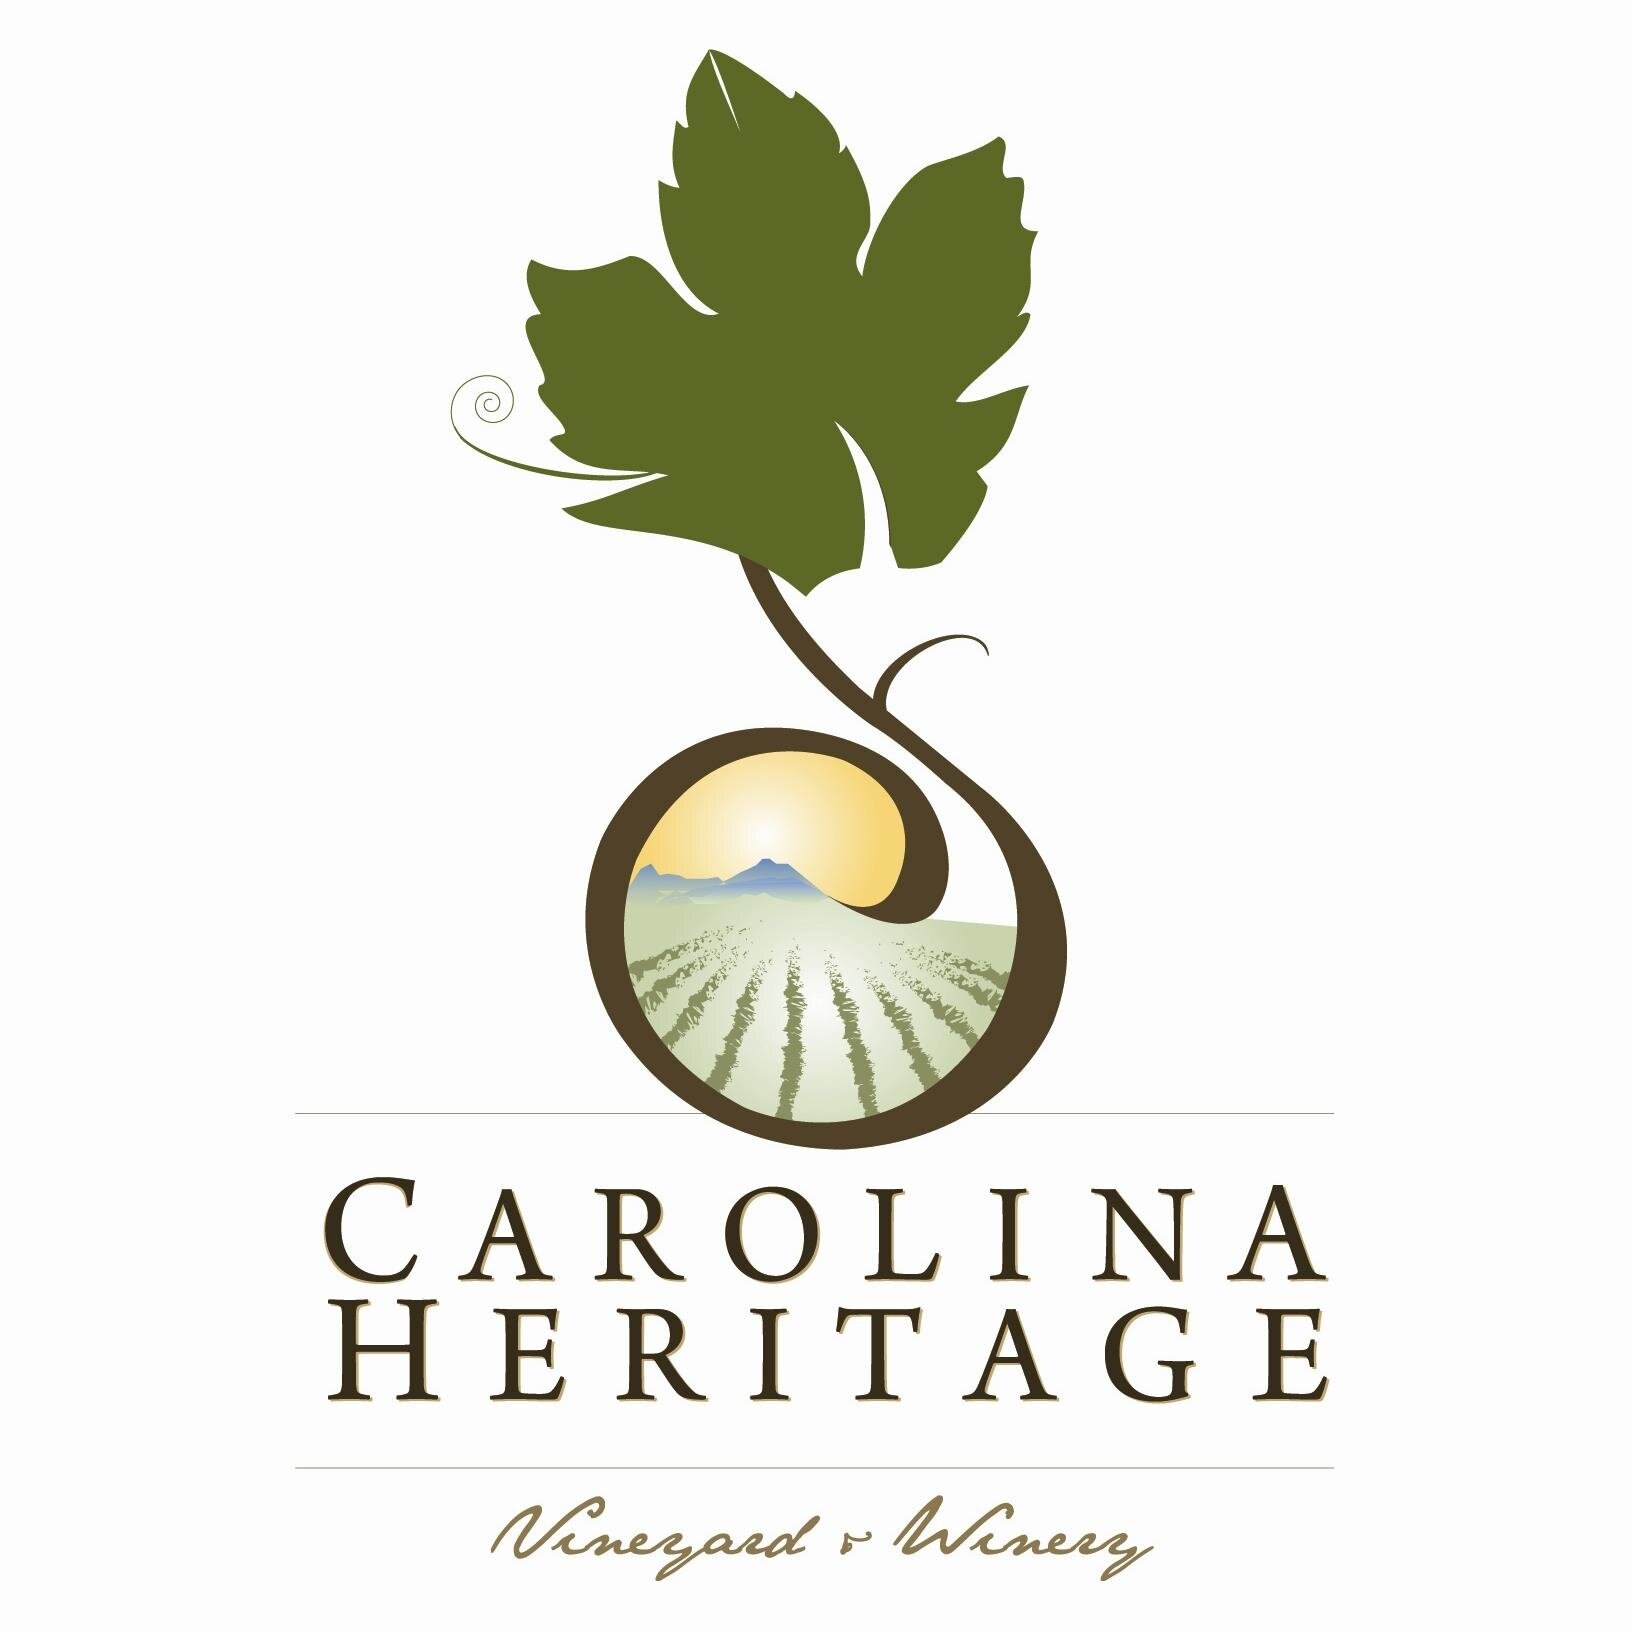 Carolina Heritage Vineyard & Winery was established in 2005 and is the first USDA-Certified Organic Vineyard and Winery in North Carolina.